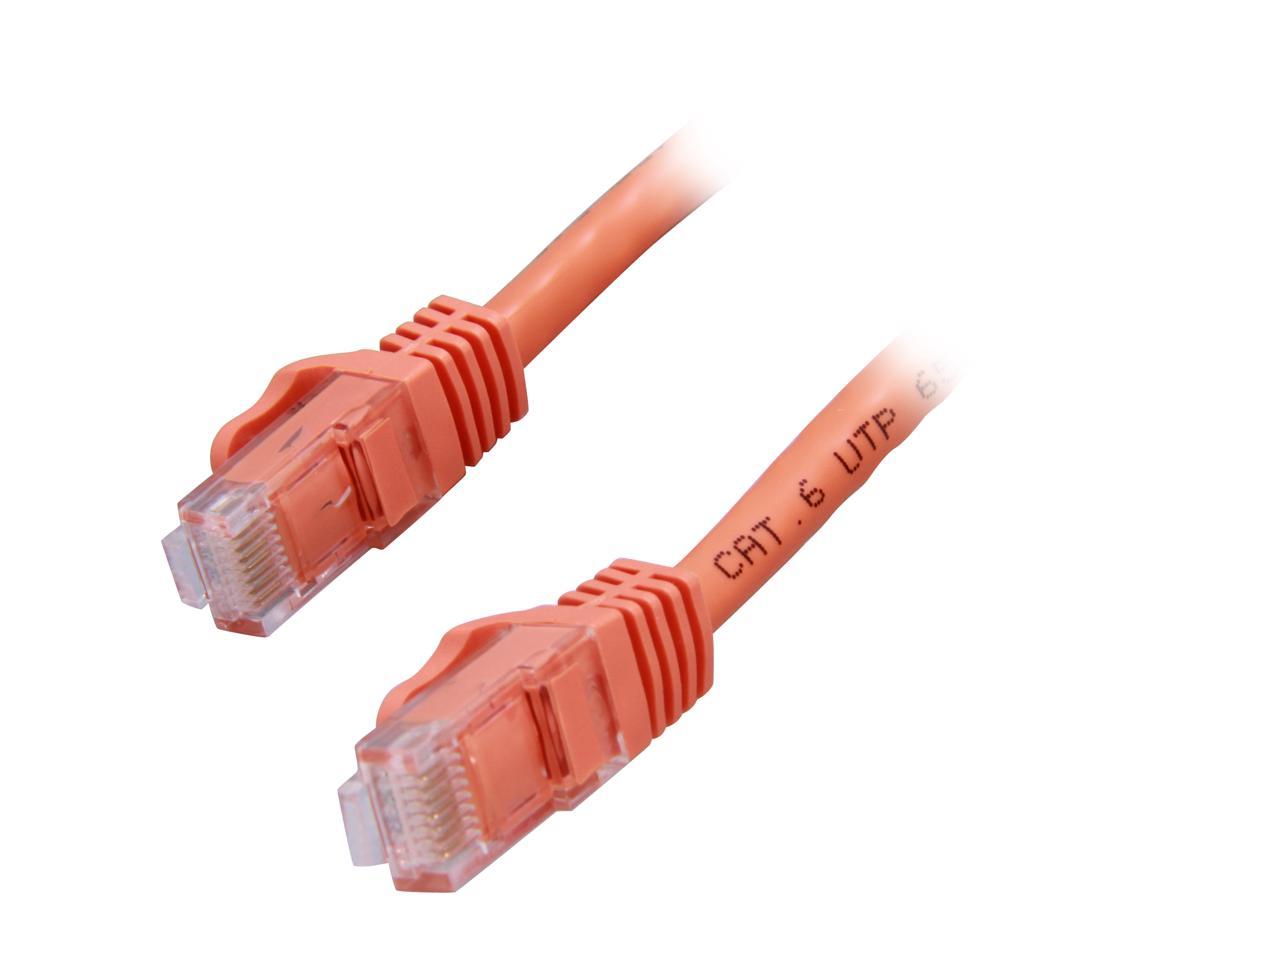 1m Ethernet Home Office Cable Cat6 UTP RJ45 Network Patchlead 100% Copper lot 